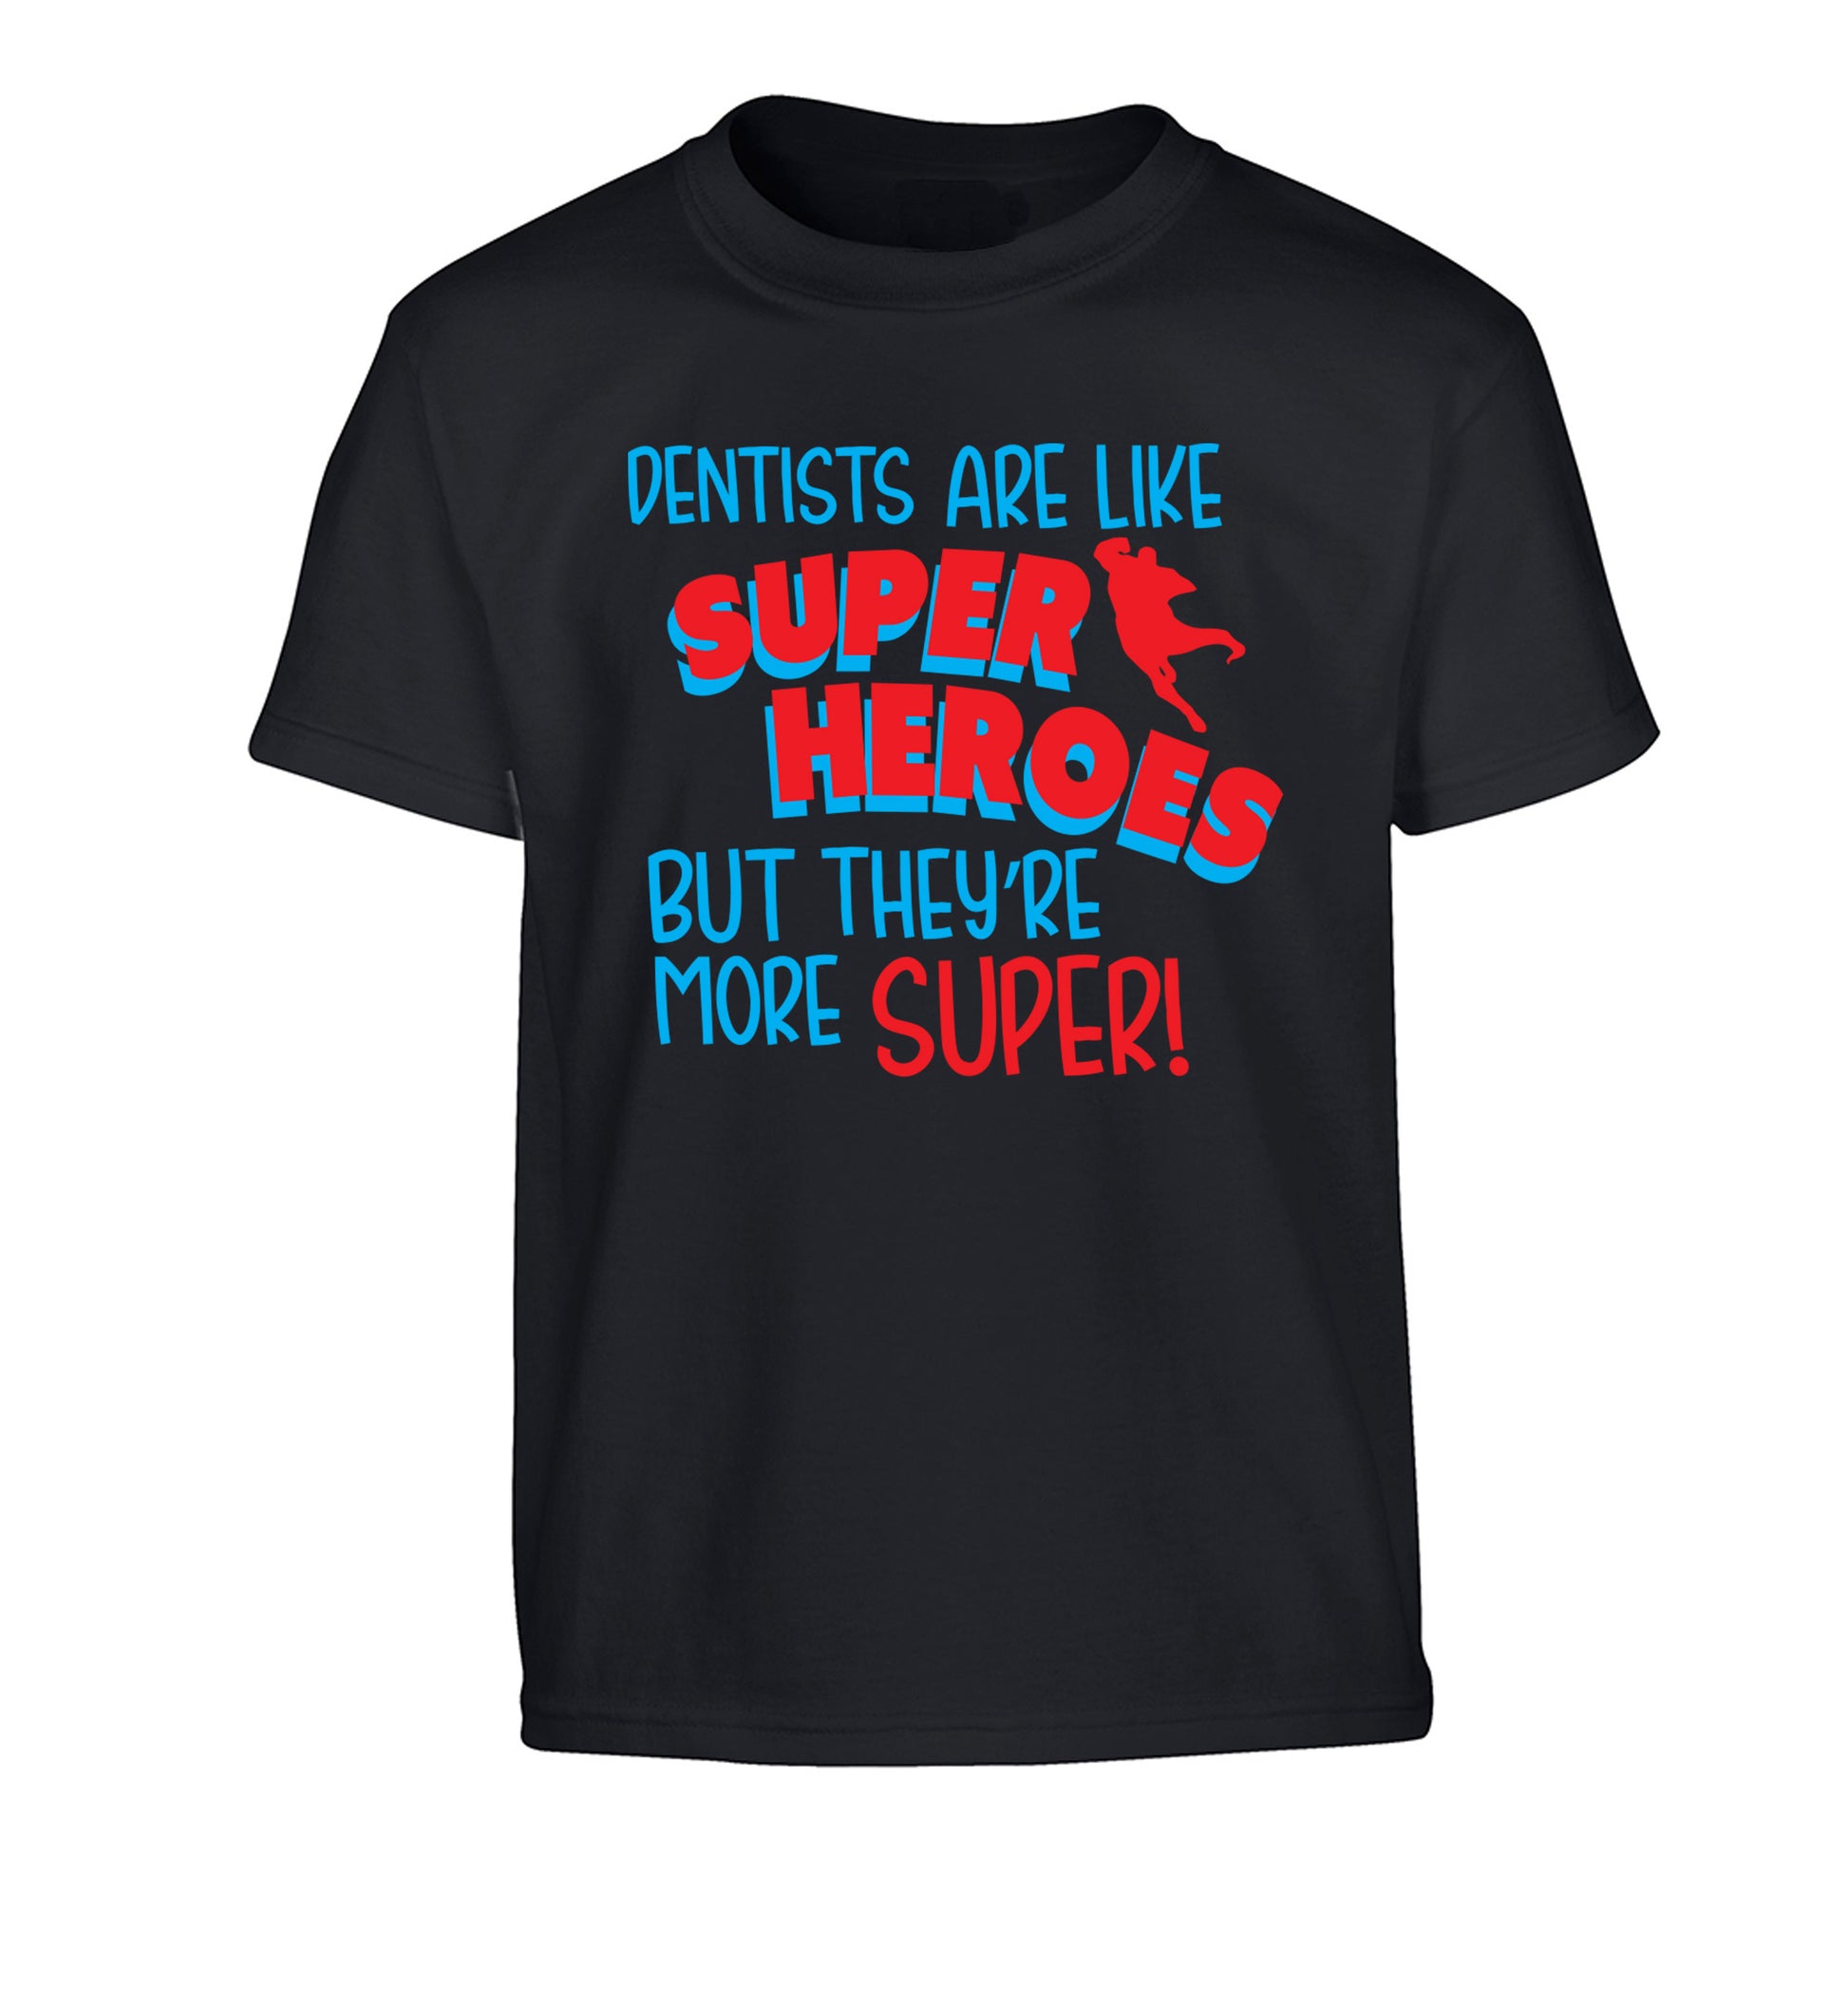 Dentists are like superheros but they're more super Children's black Tshirt 12-13 Years